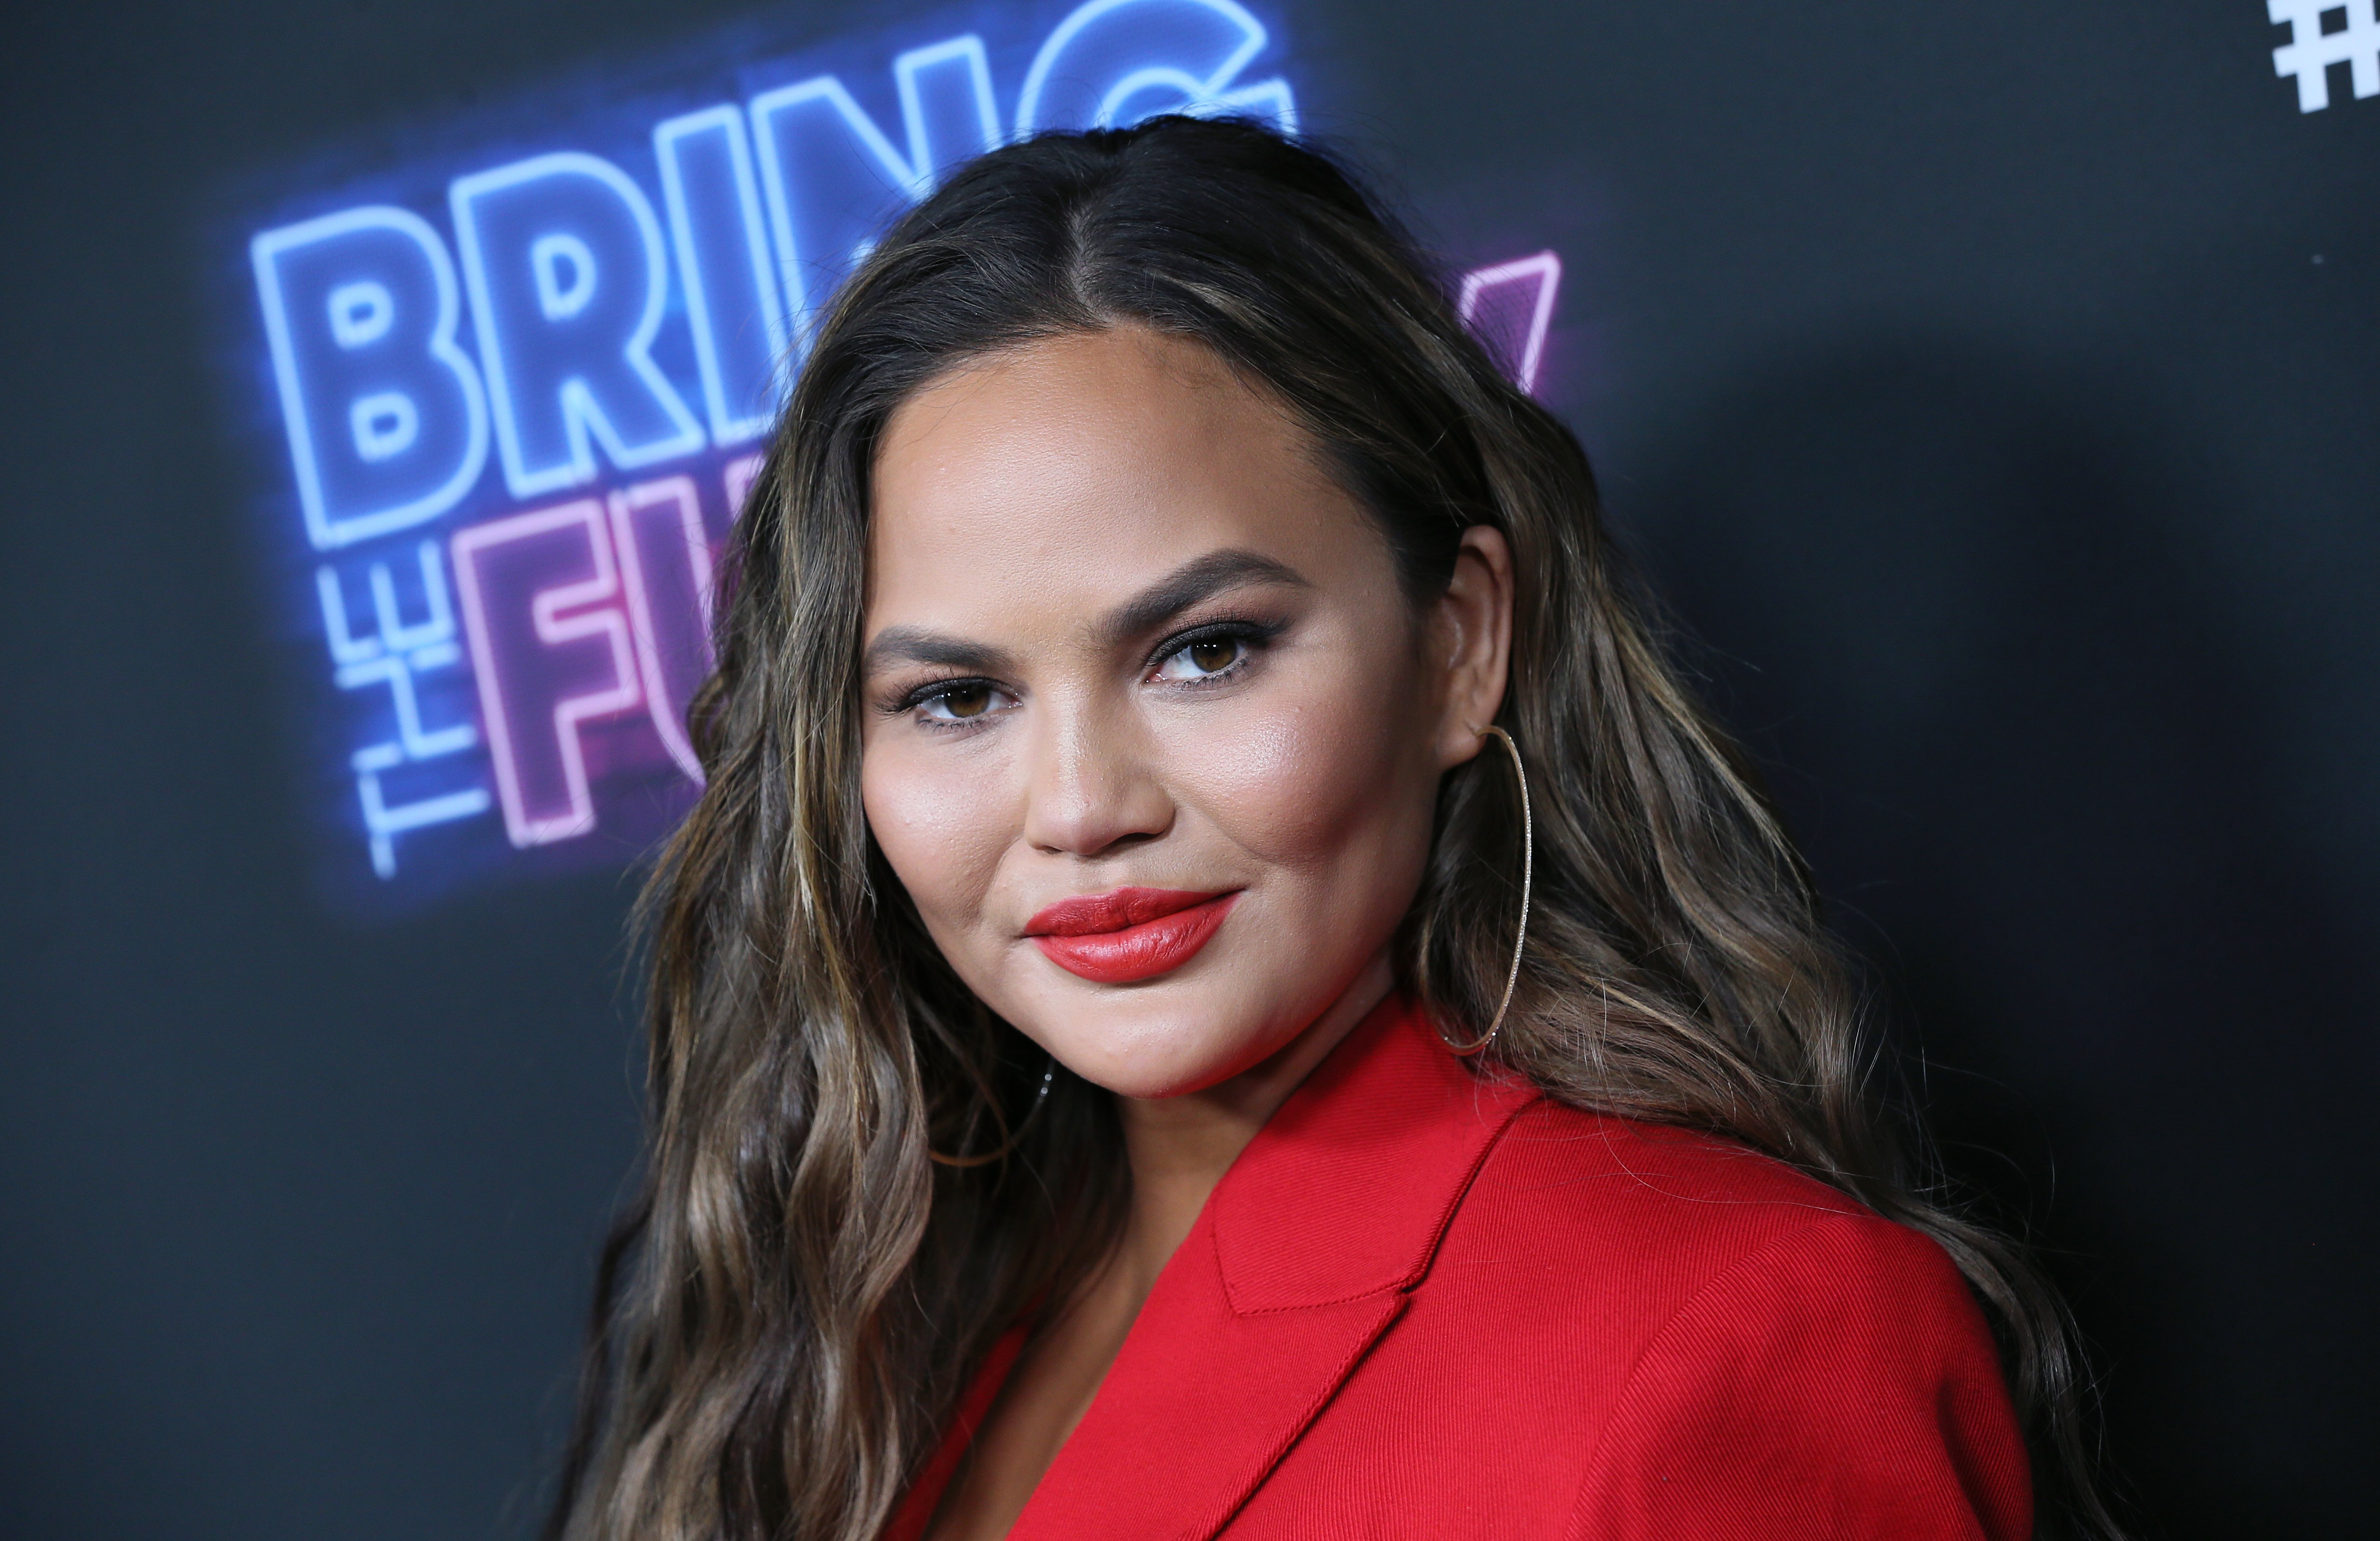 Chrissy Teigen at the premiere of "Bring The Funny" in June 2019. | Photo: Getty Images